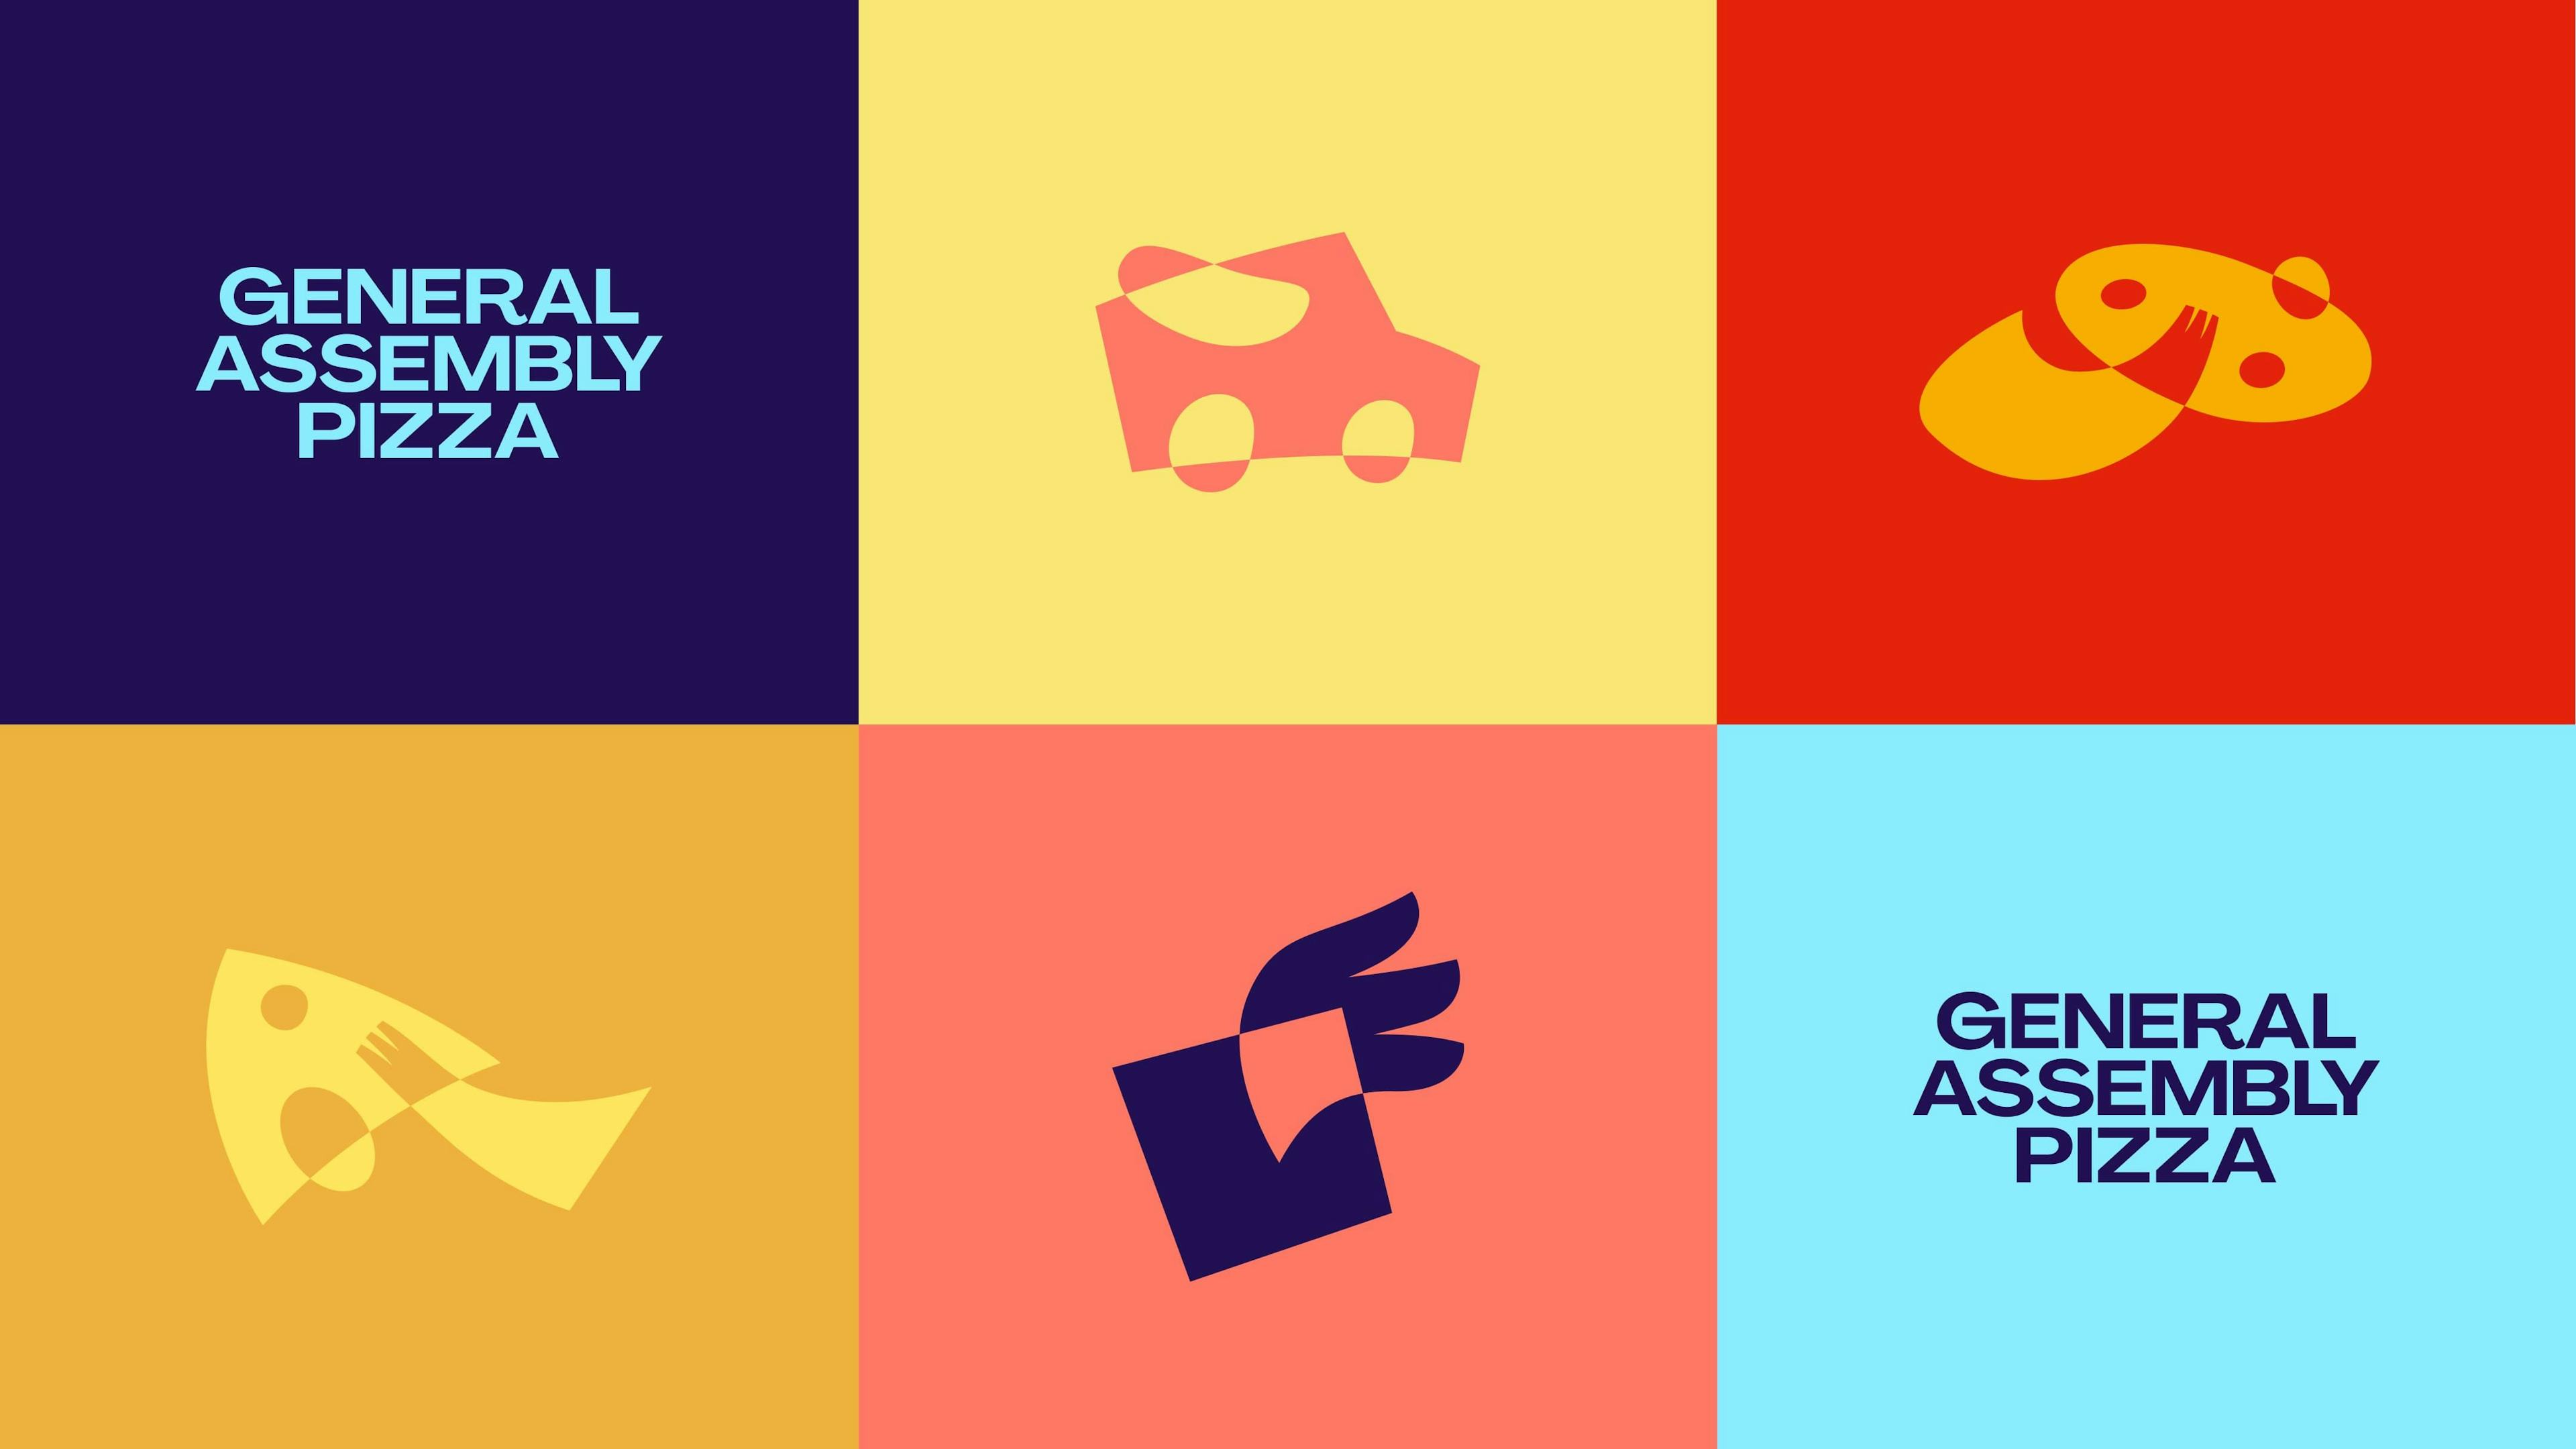 Brand identity, color palette and iconography for General Assembly Pizza.